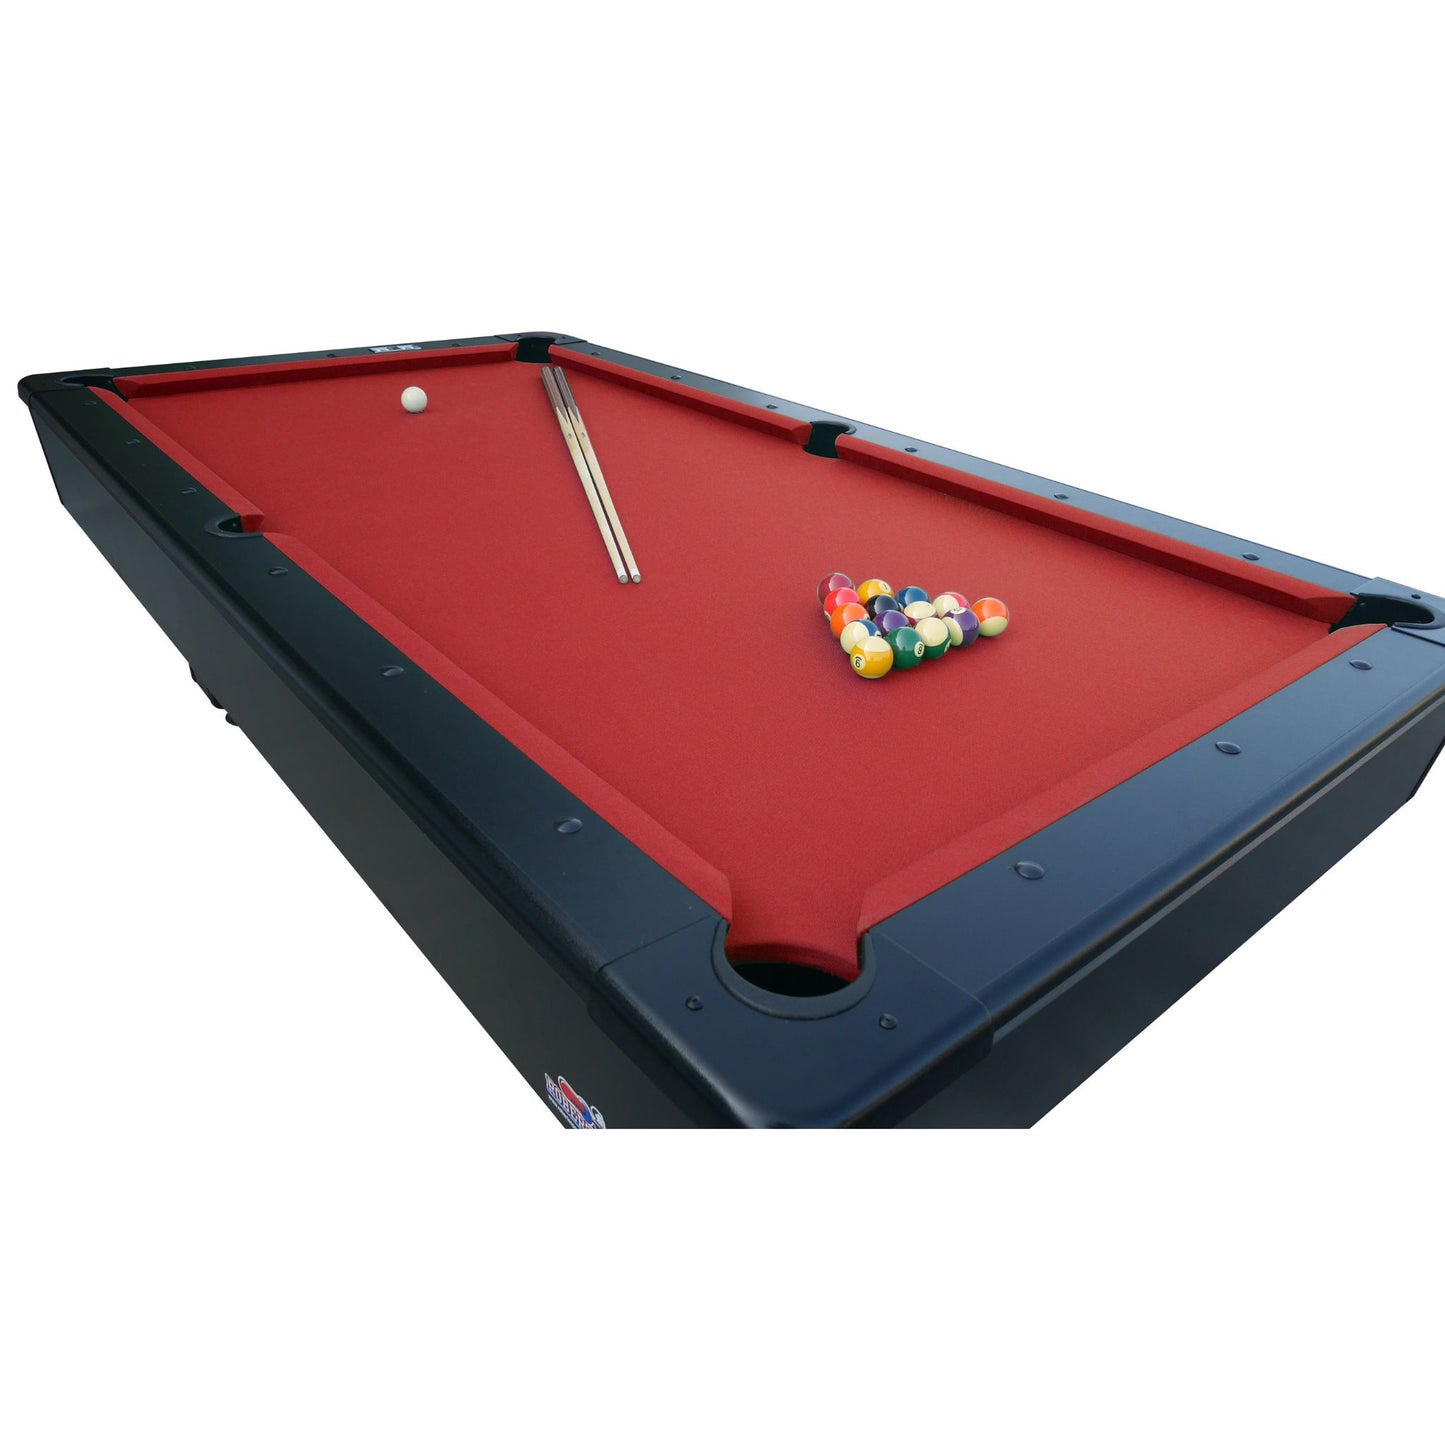 First Pool 6ft-8ft Size | American Pool Table